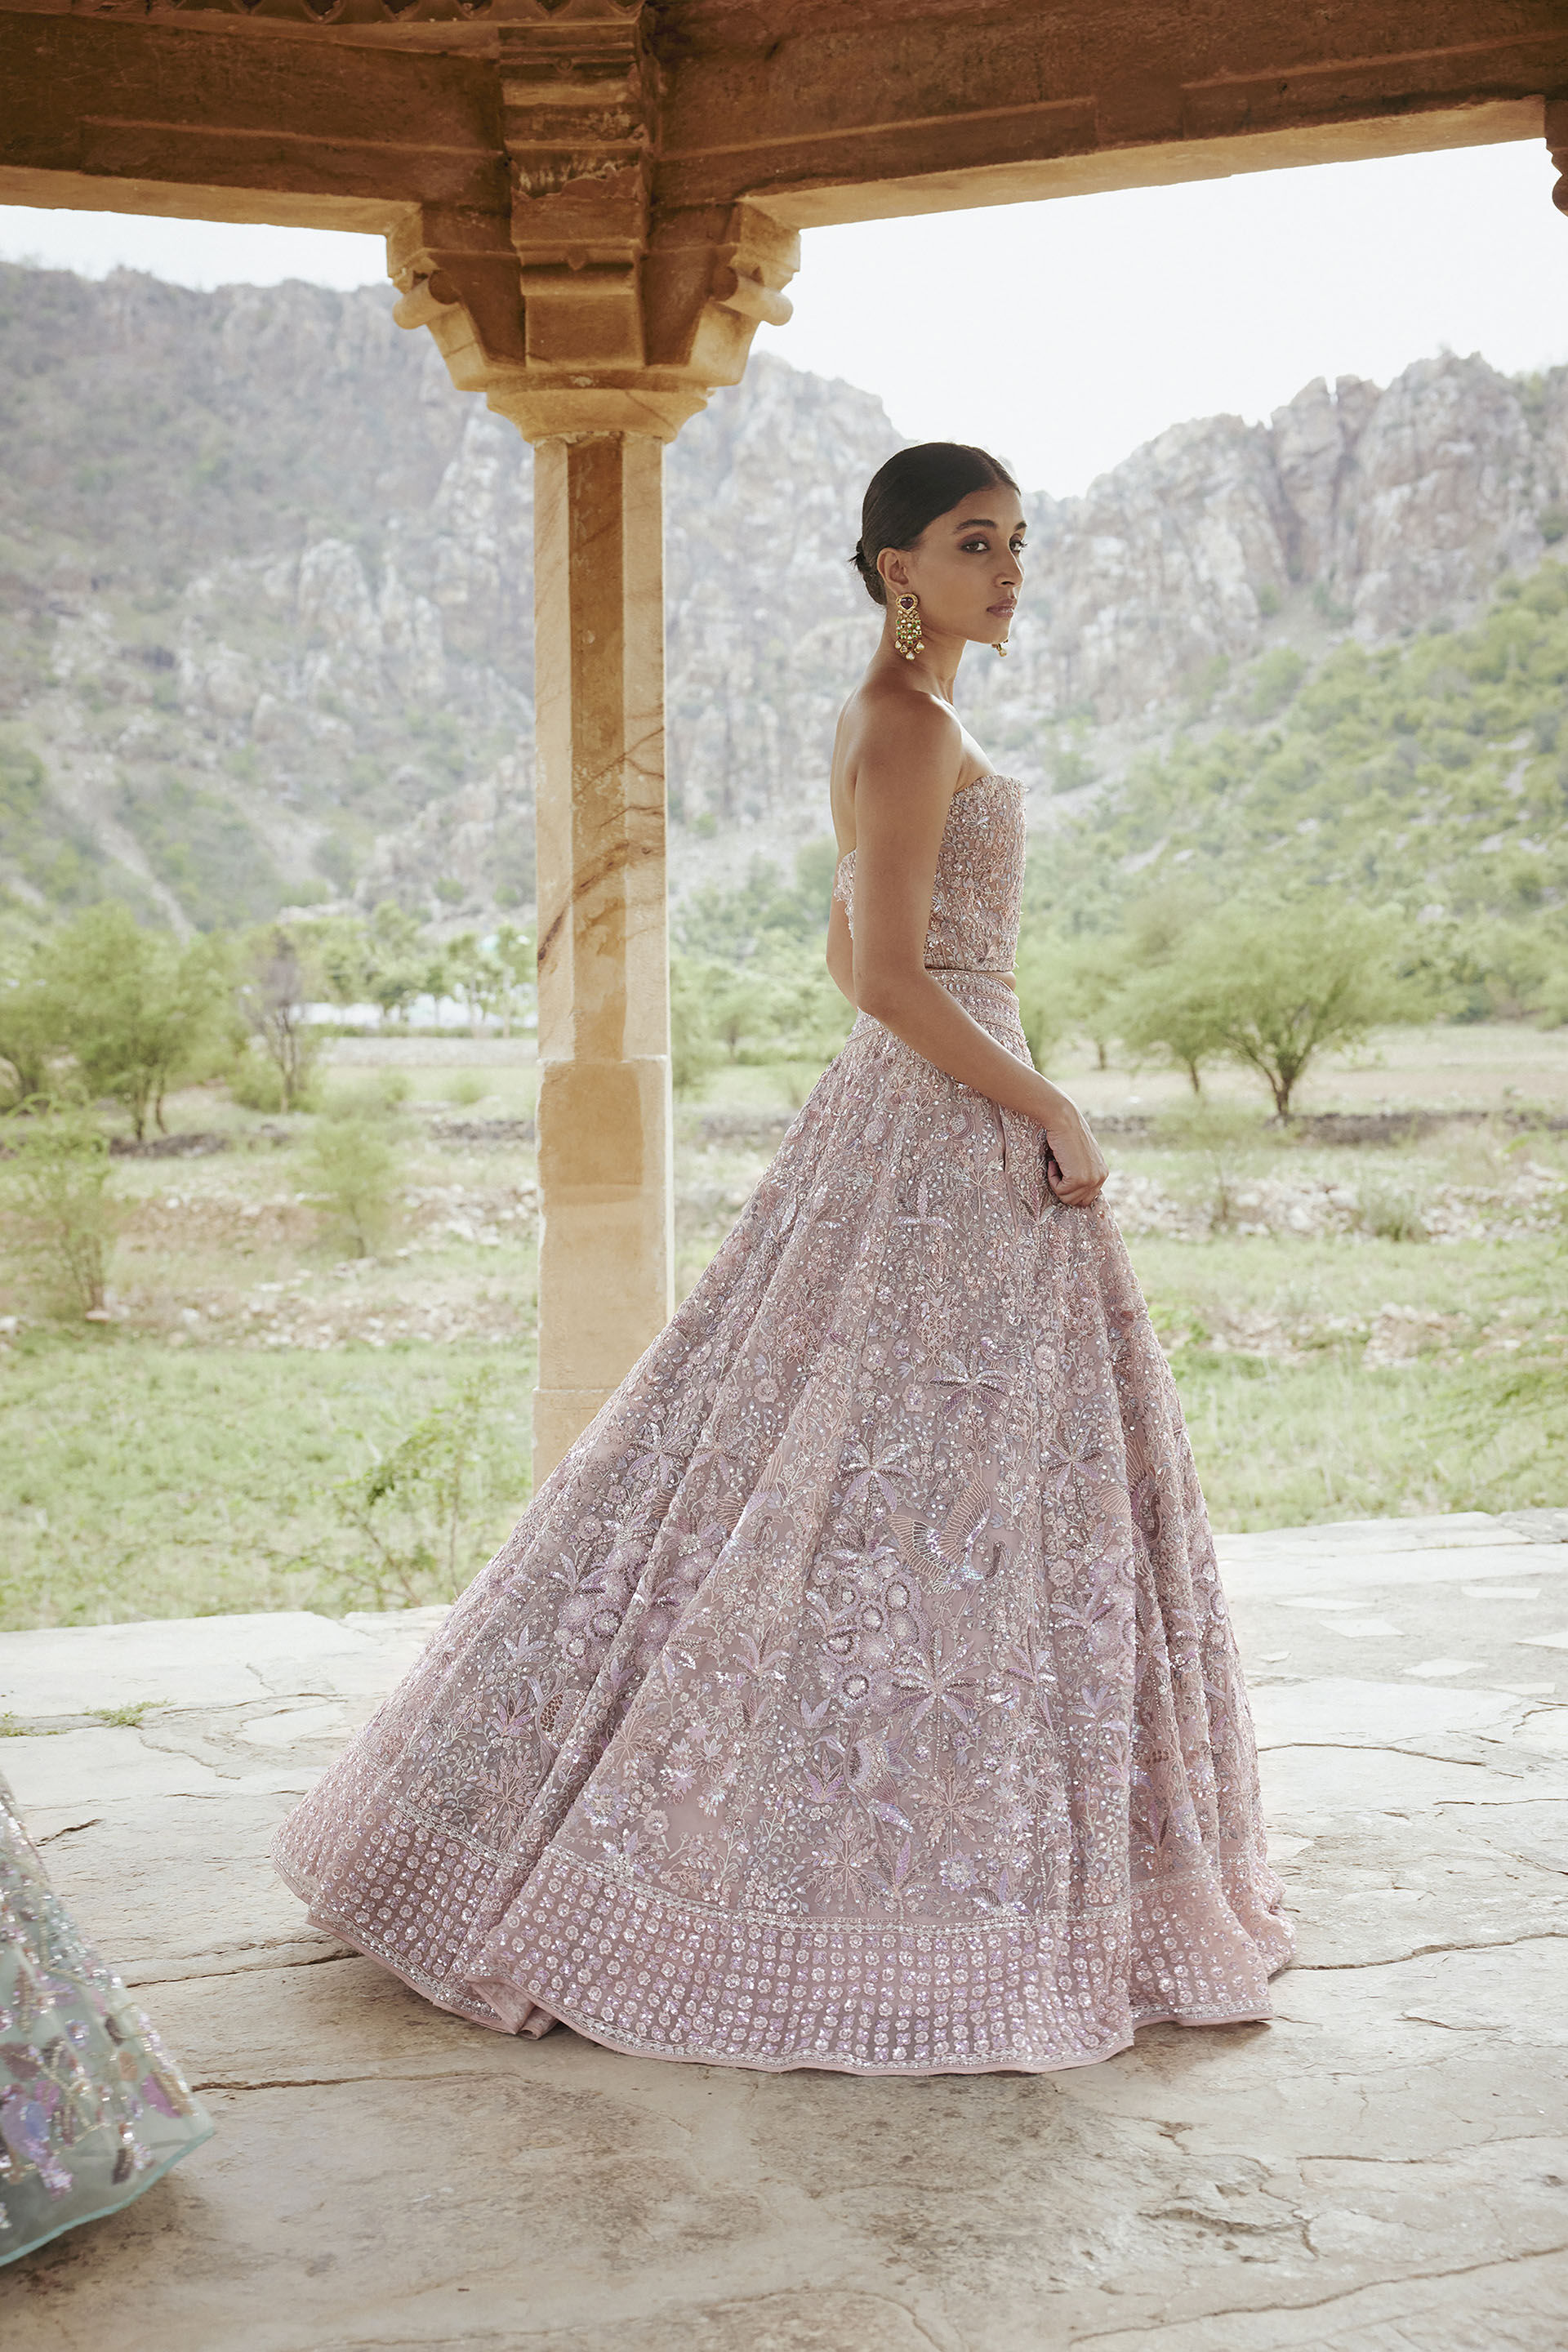 Anita Dongre's new collection includes lehengas that took 1,200 hours to  craft | Vogue India